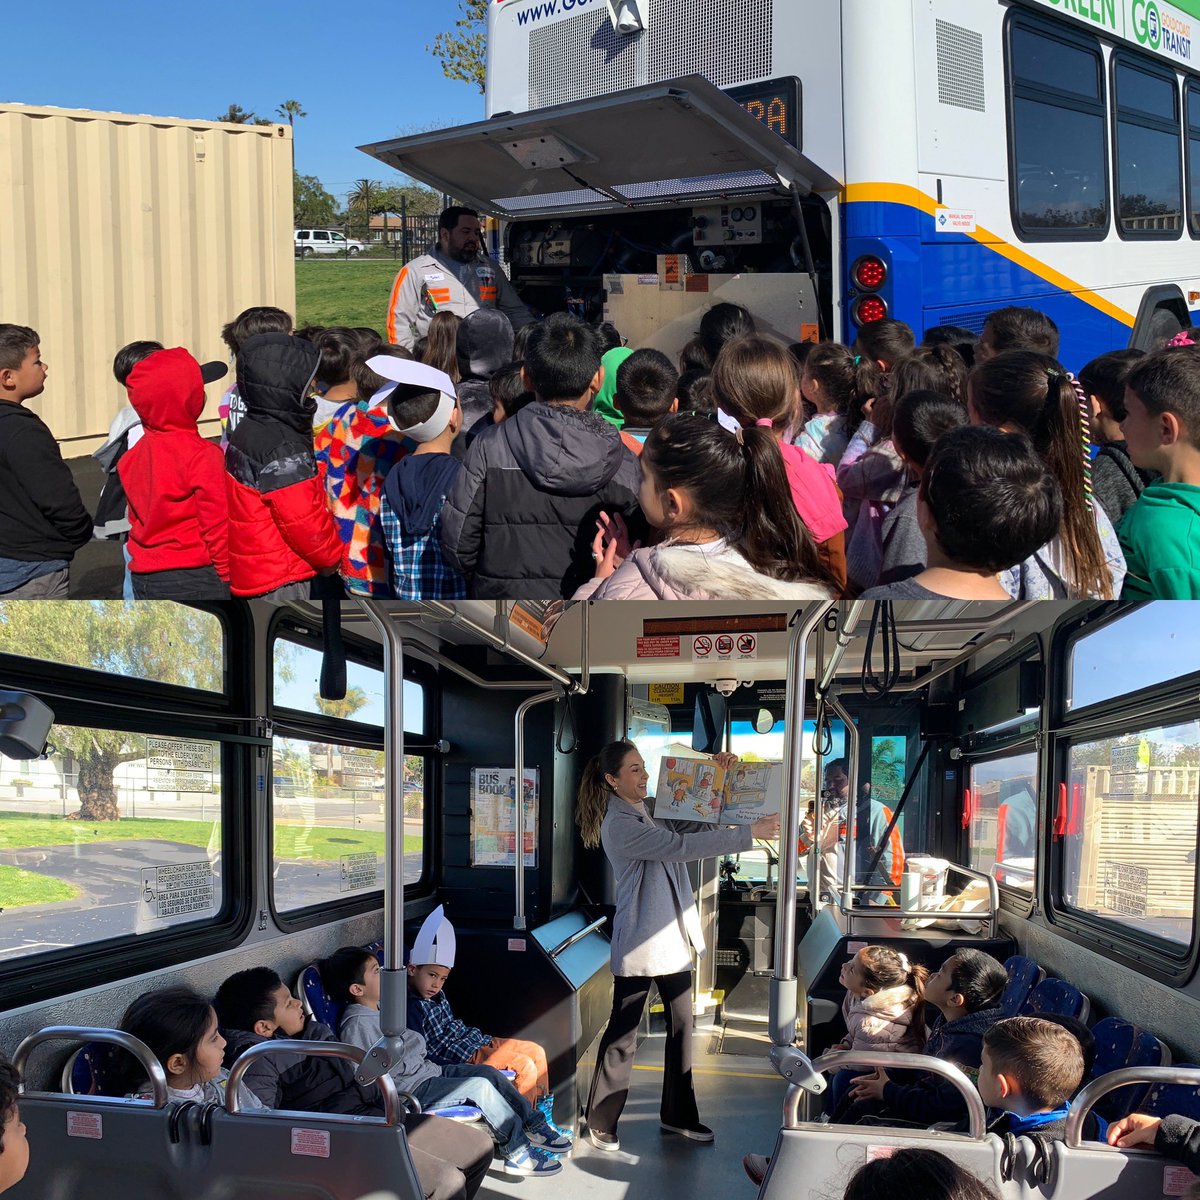 @GoldCoastBus Thx to Cynthia and Tyler for our community presentation today. The TK’s and Kinders loved the read aloud and getting in the bus. #rioschools